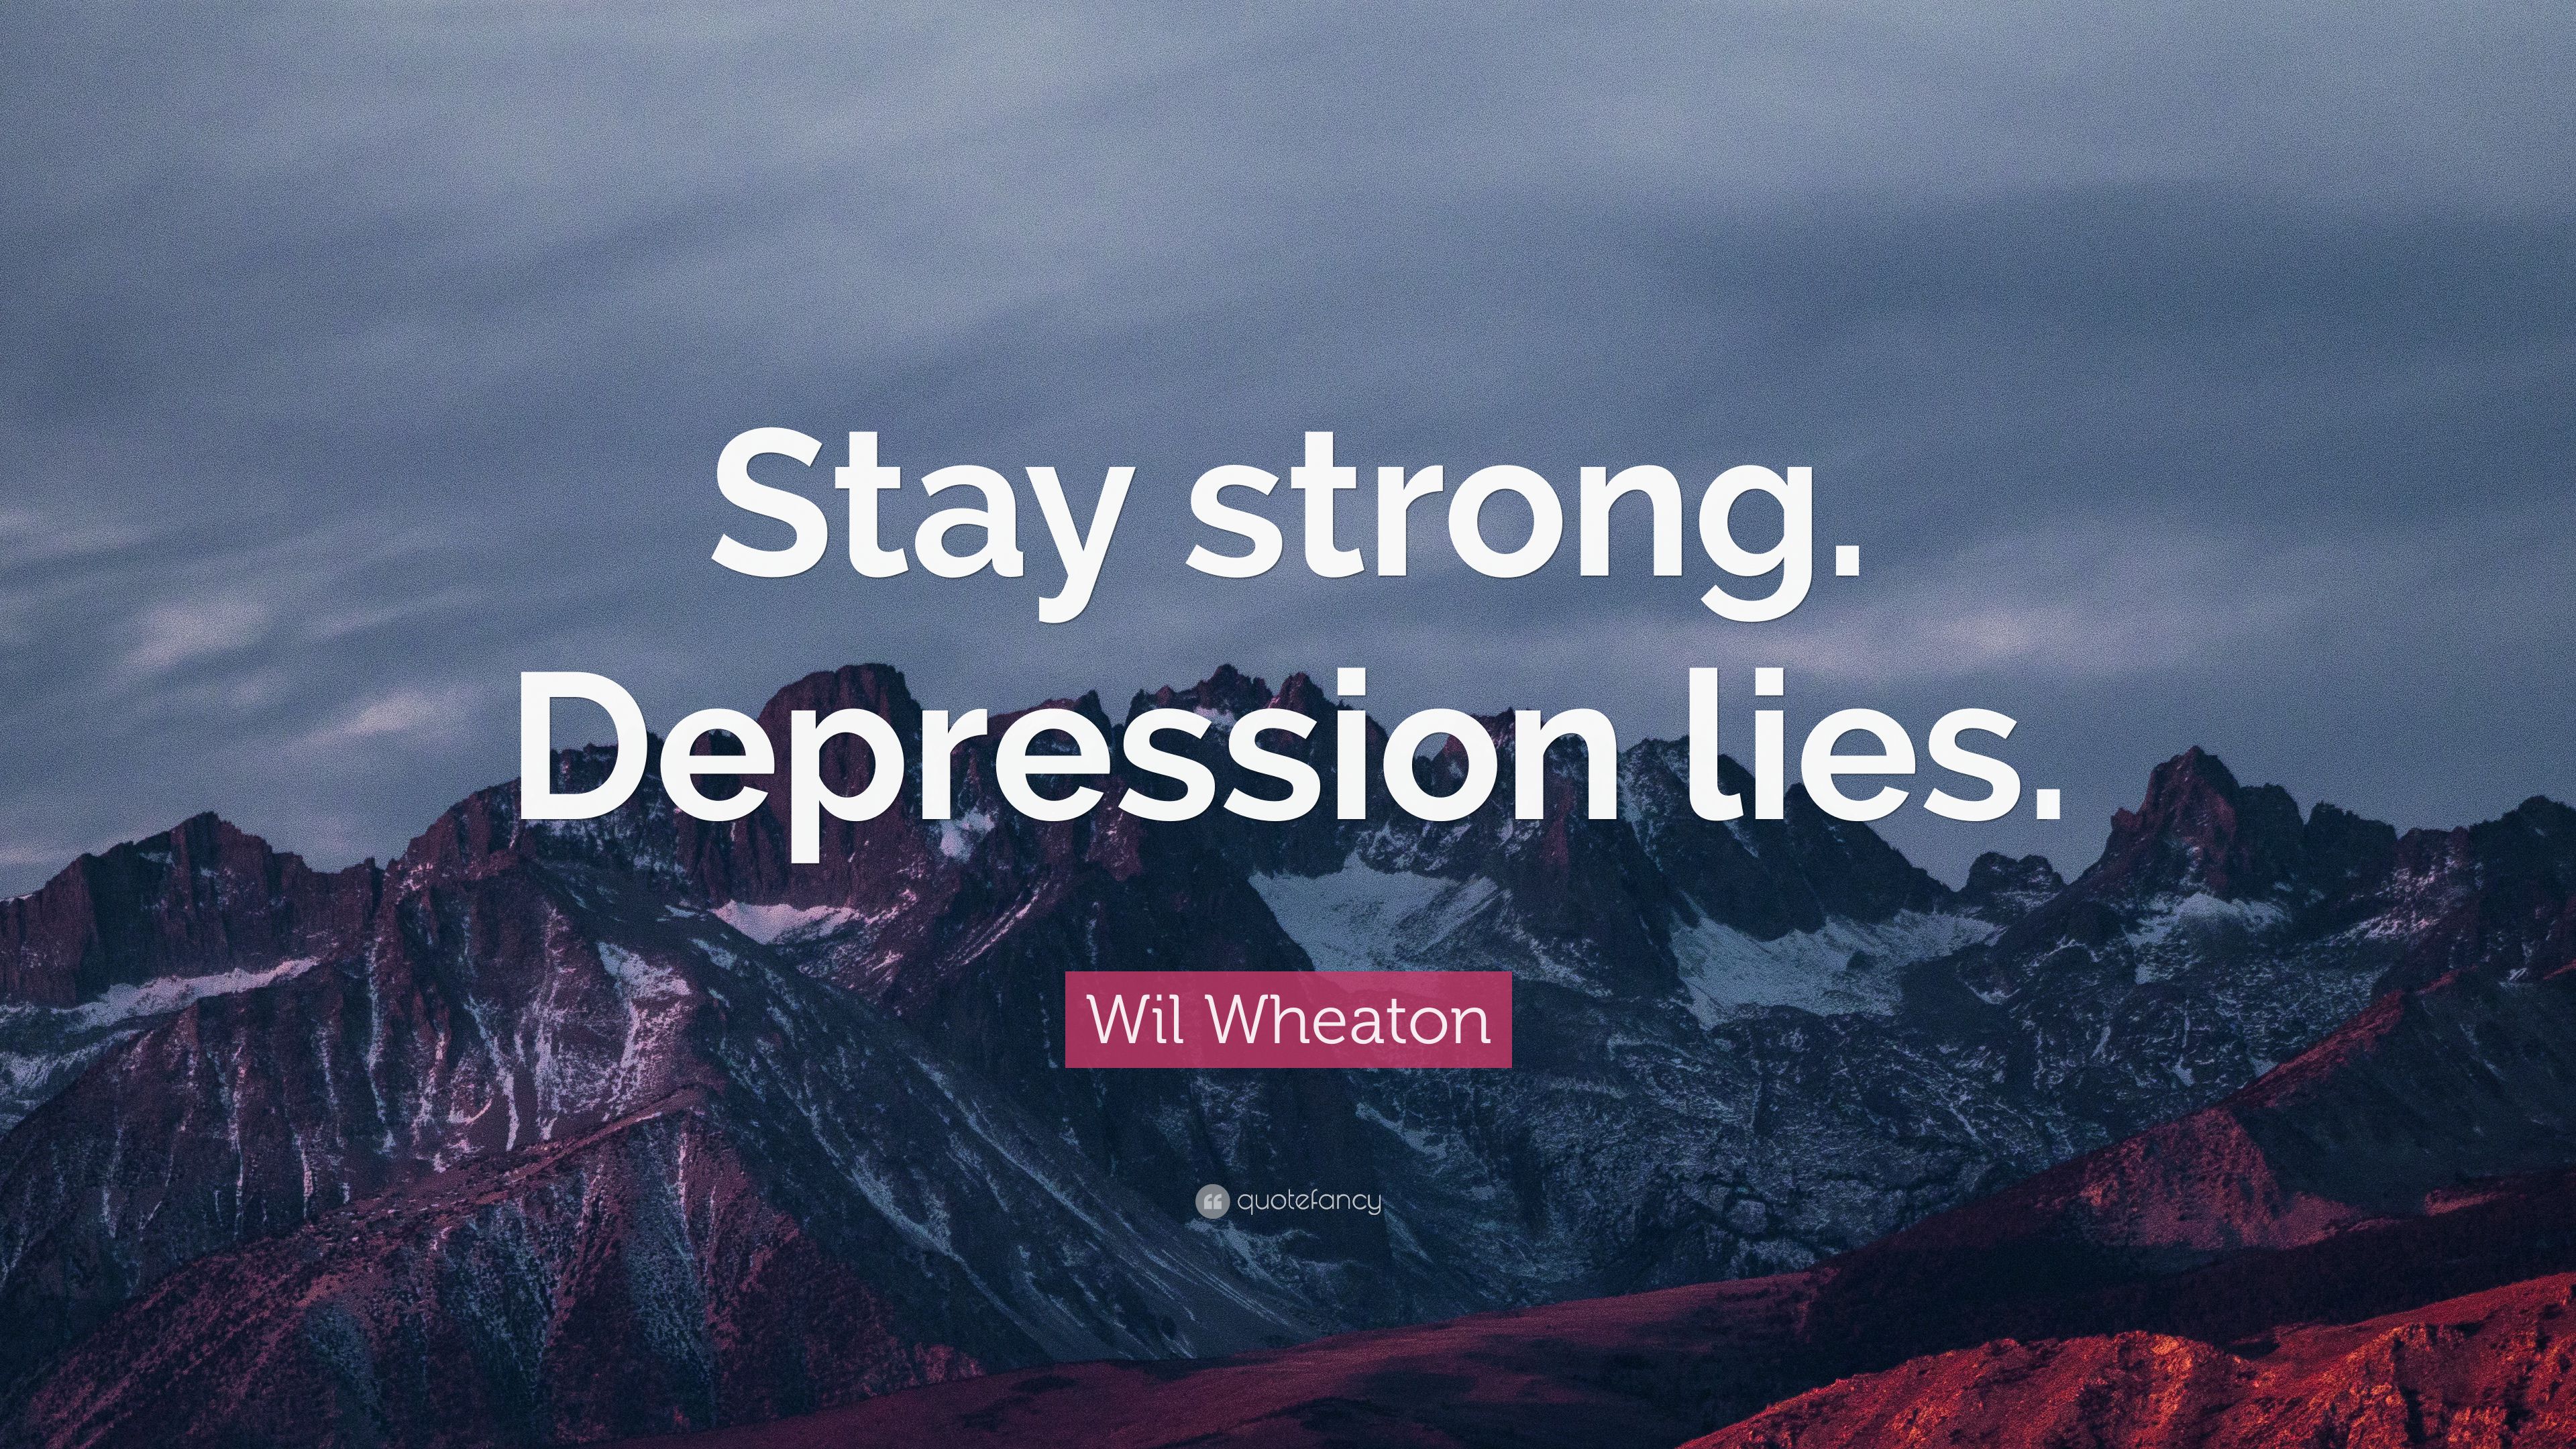 Wil Wheaton Quote: “Stay strong .quotefancy.com